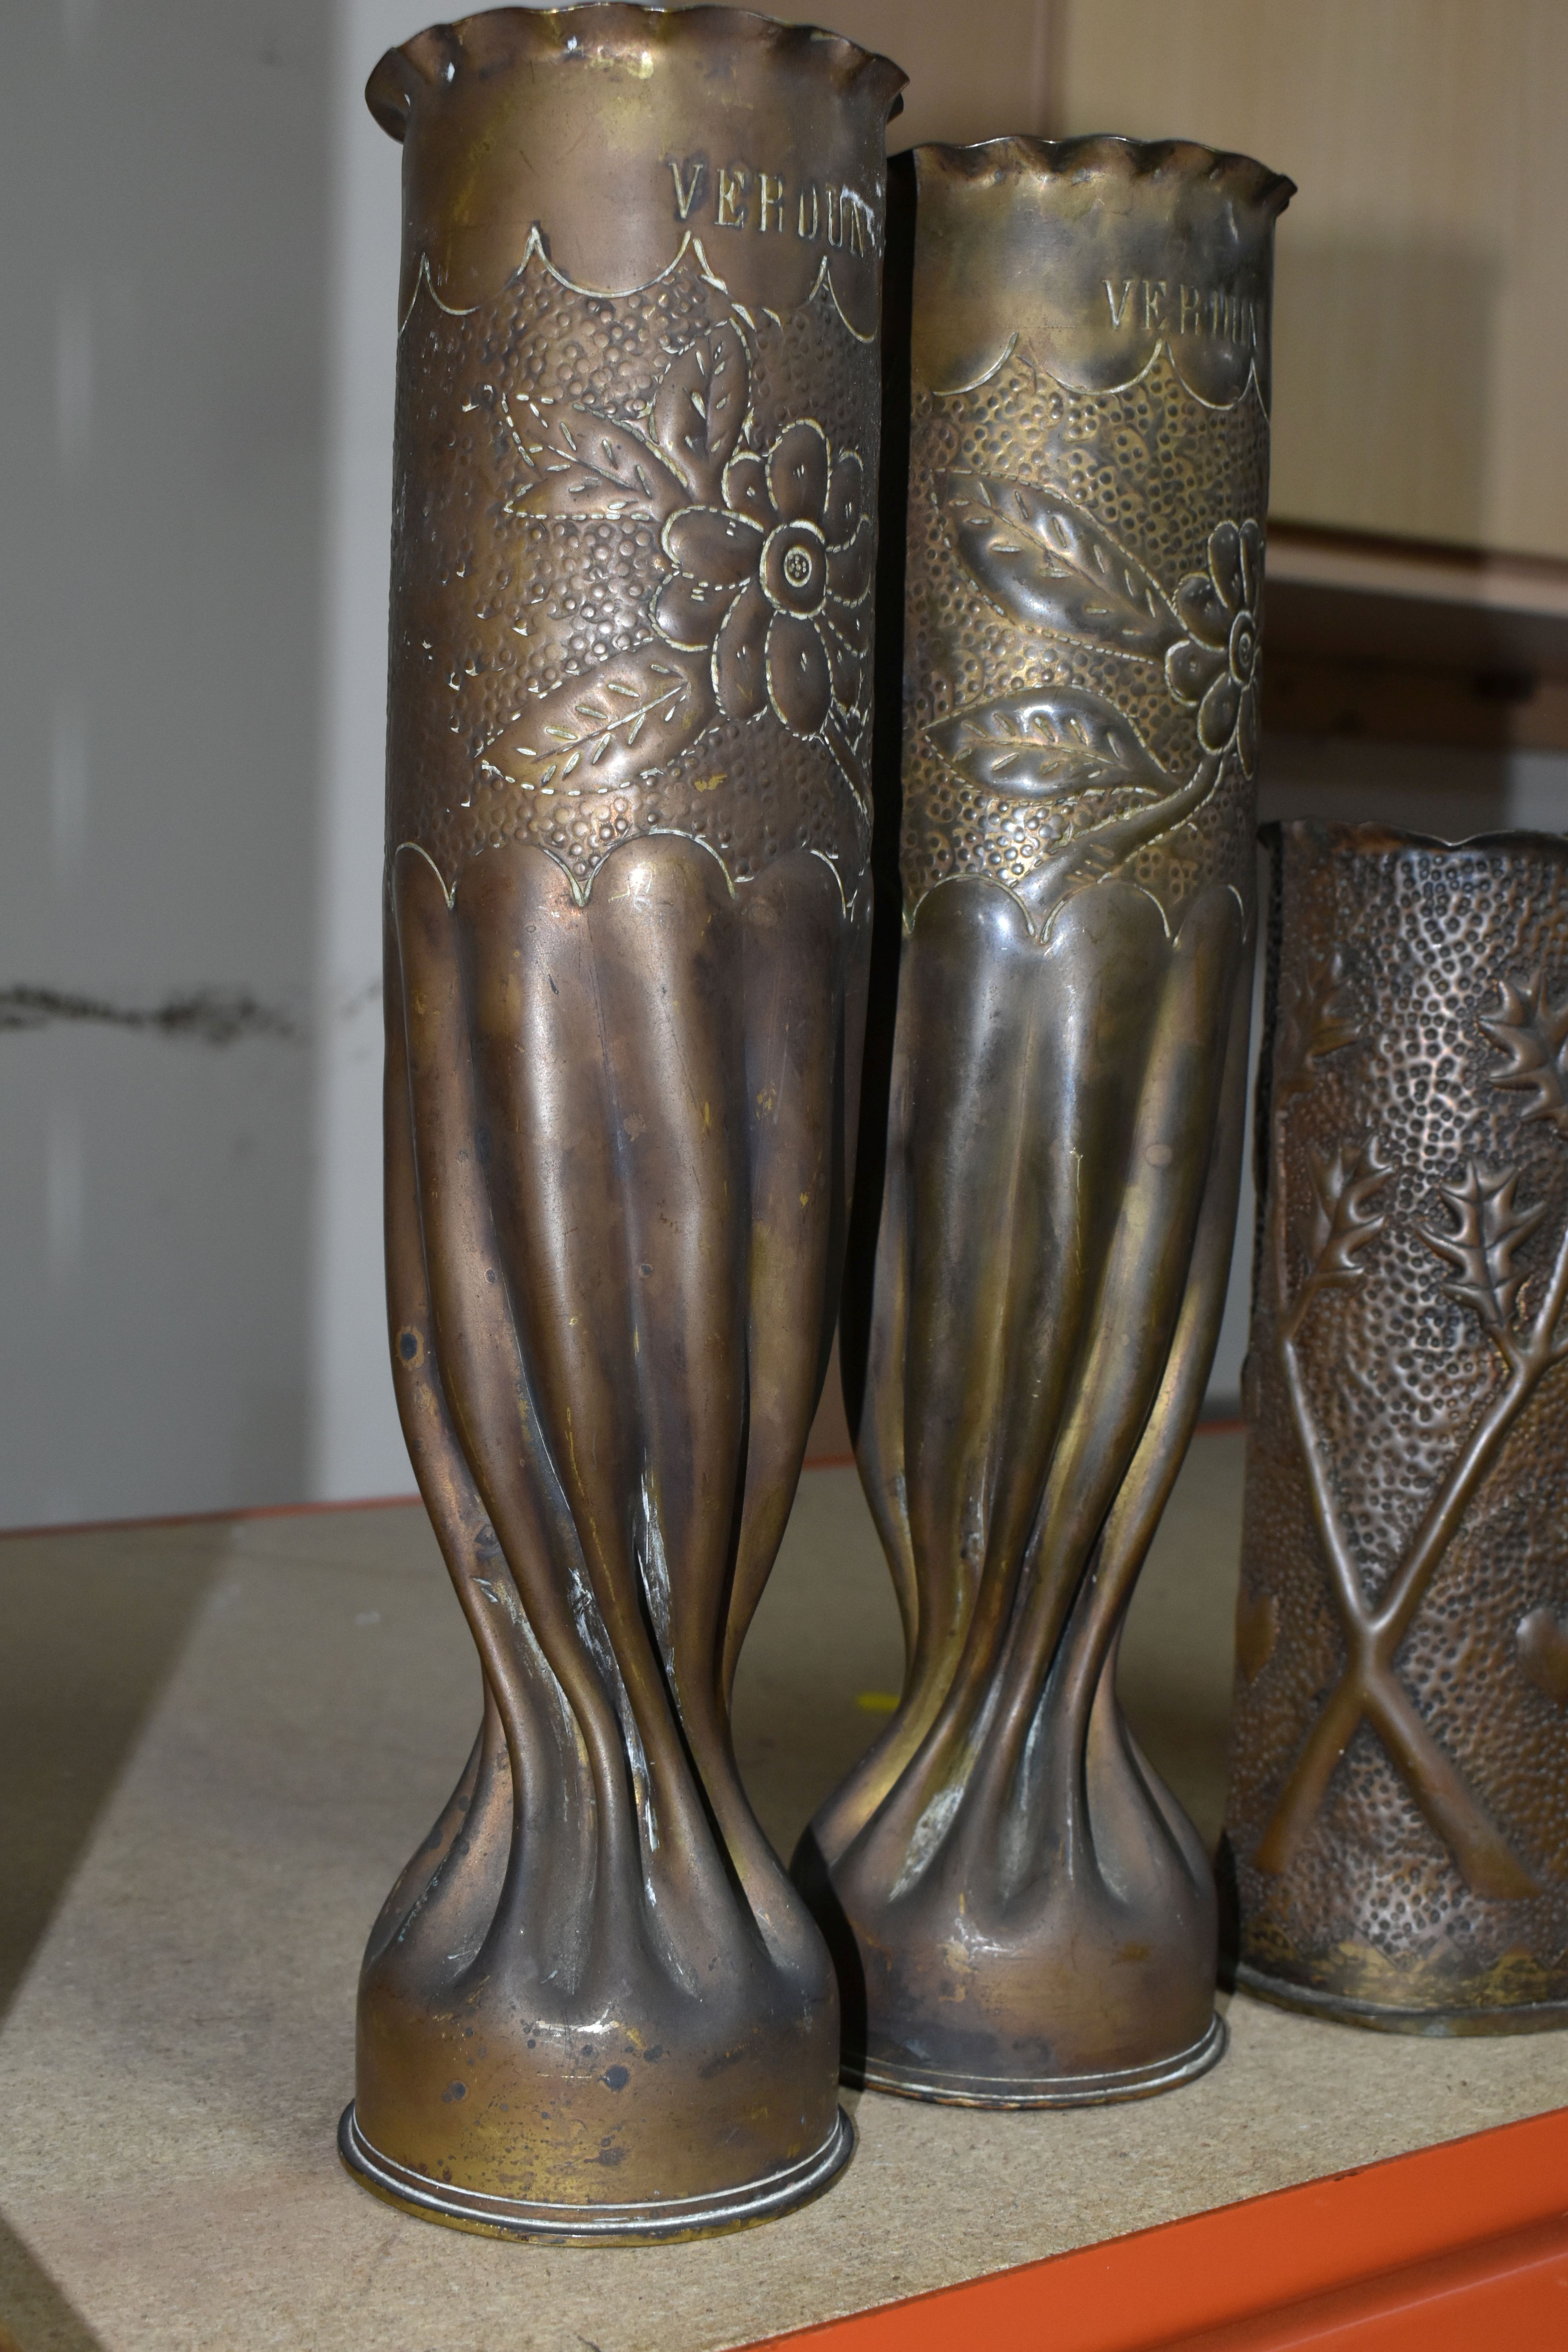 TWO PAIRS OF TRENCH ART VASES, one pair have been twisted at the base and decorated with a rose - Image 2 of 3